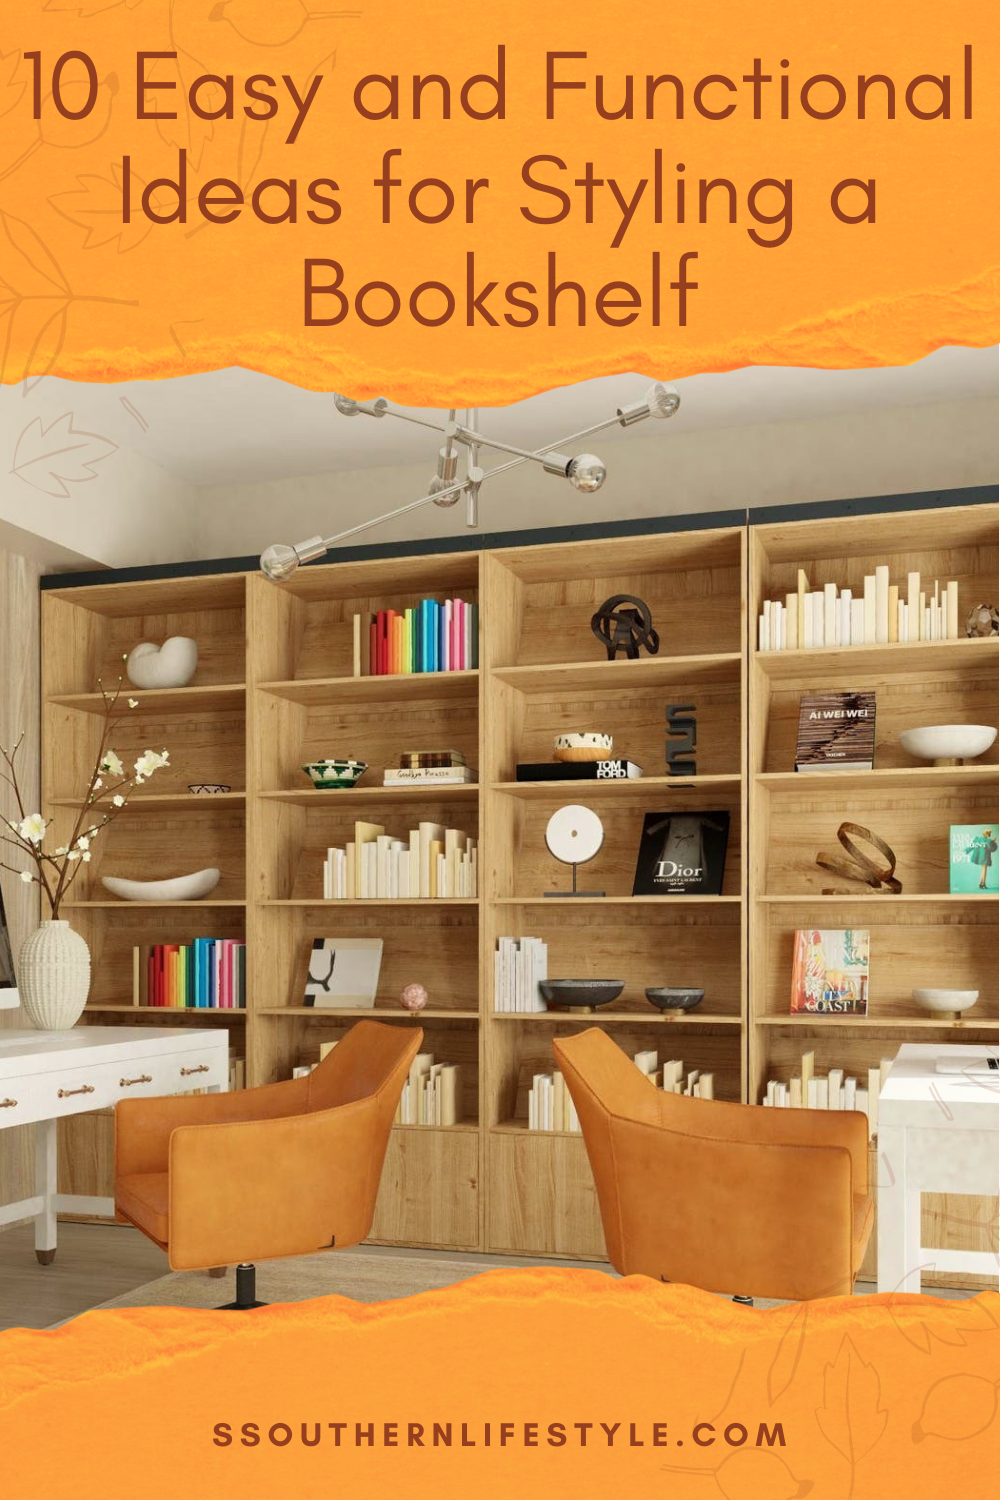 Bookshelf bookcase styling and restyling ideas and tips